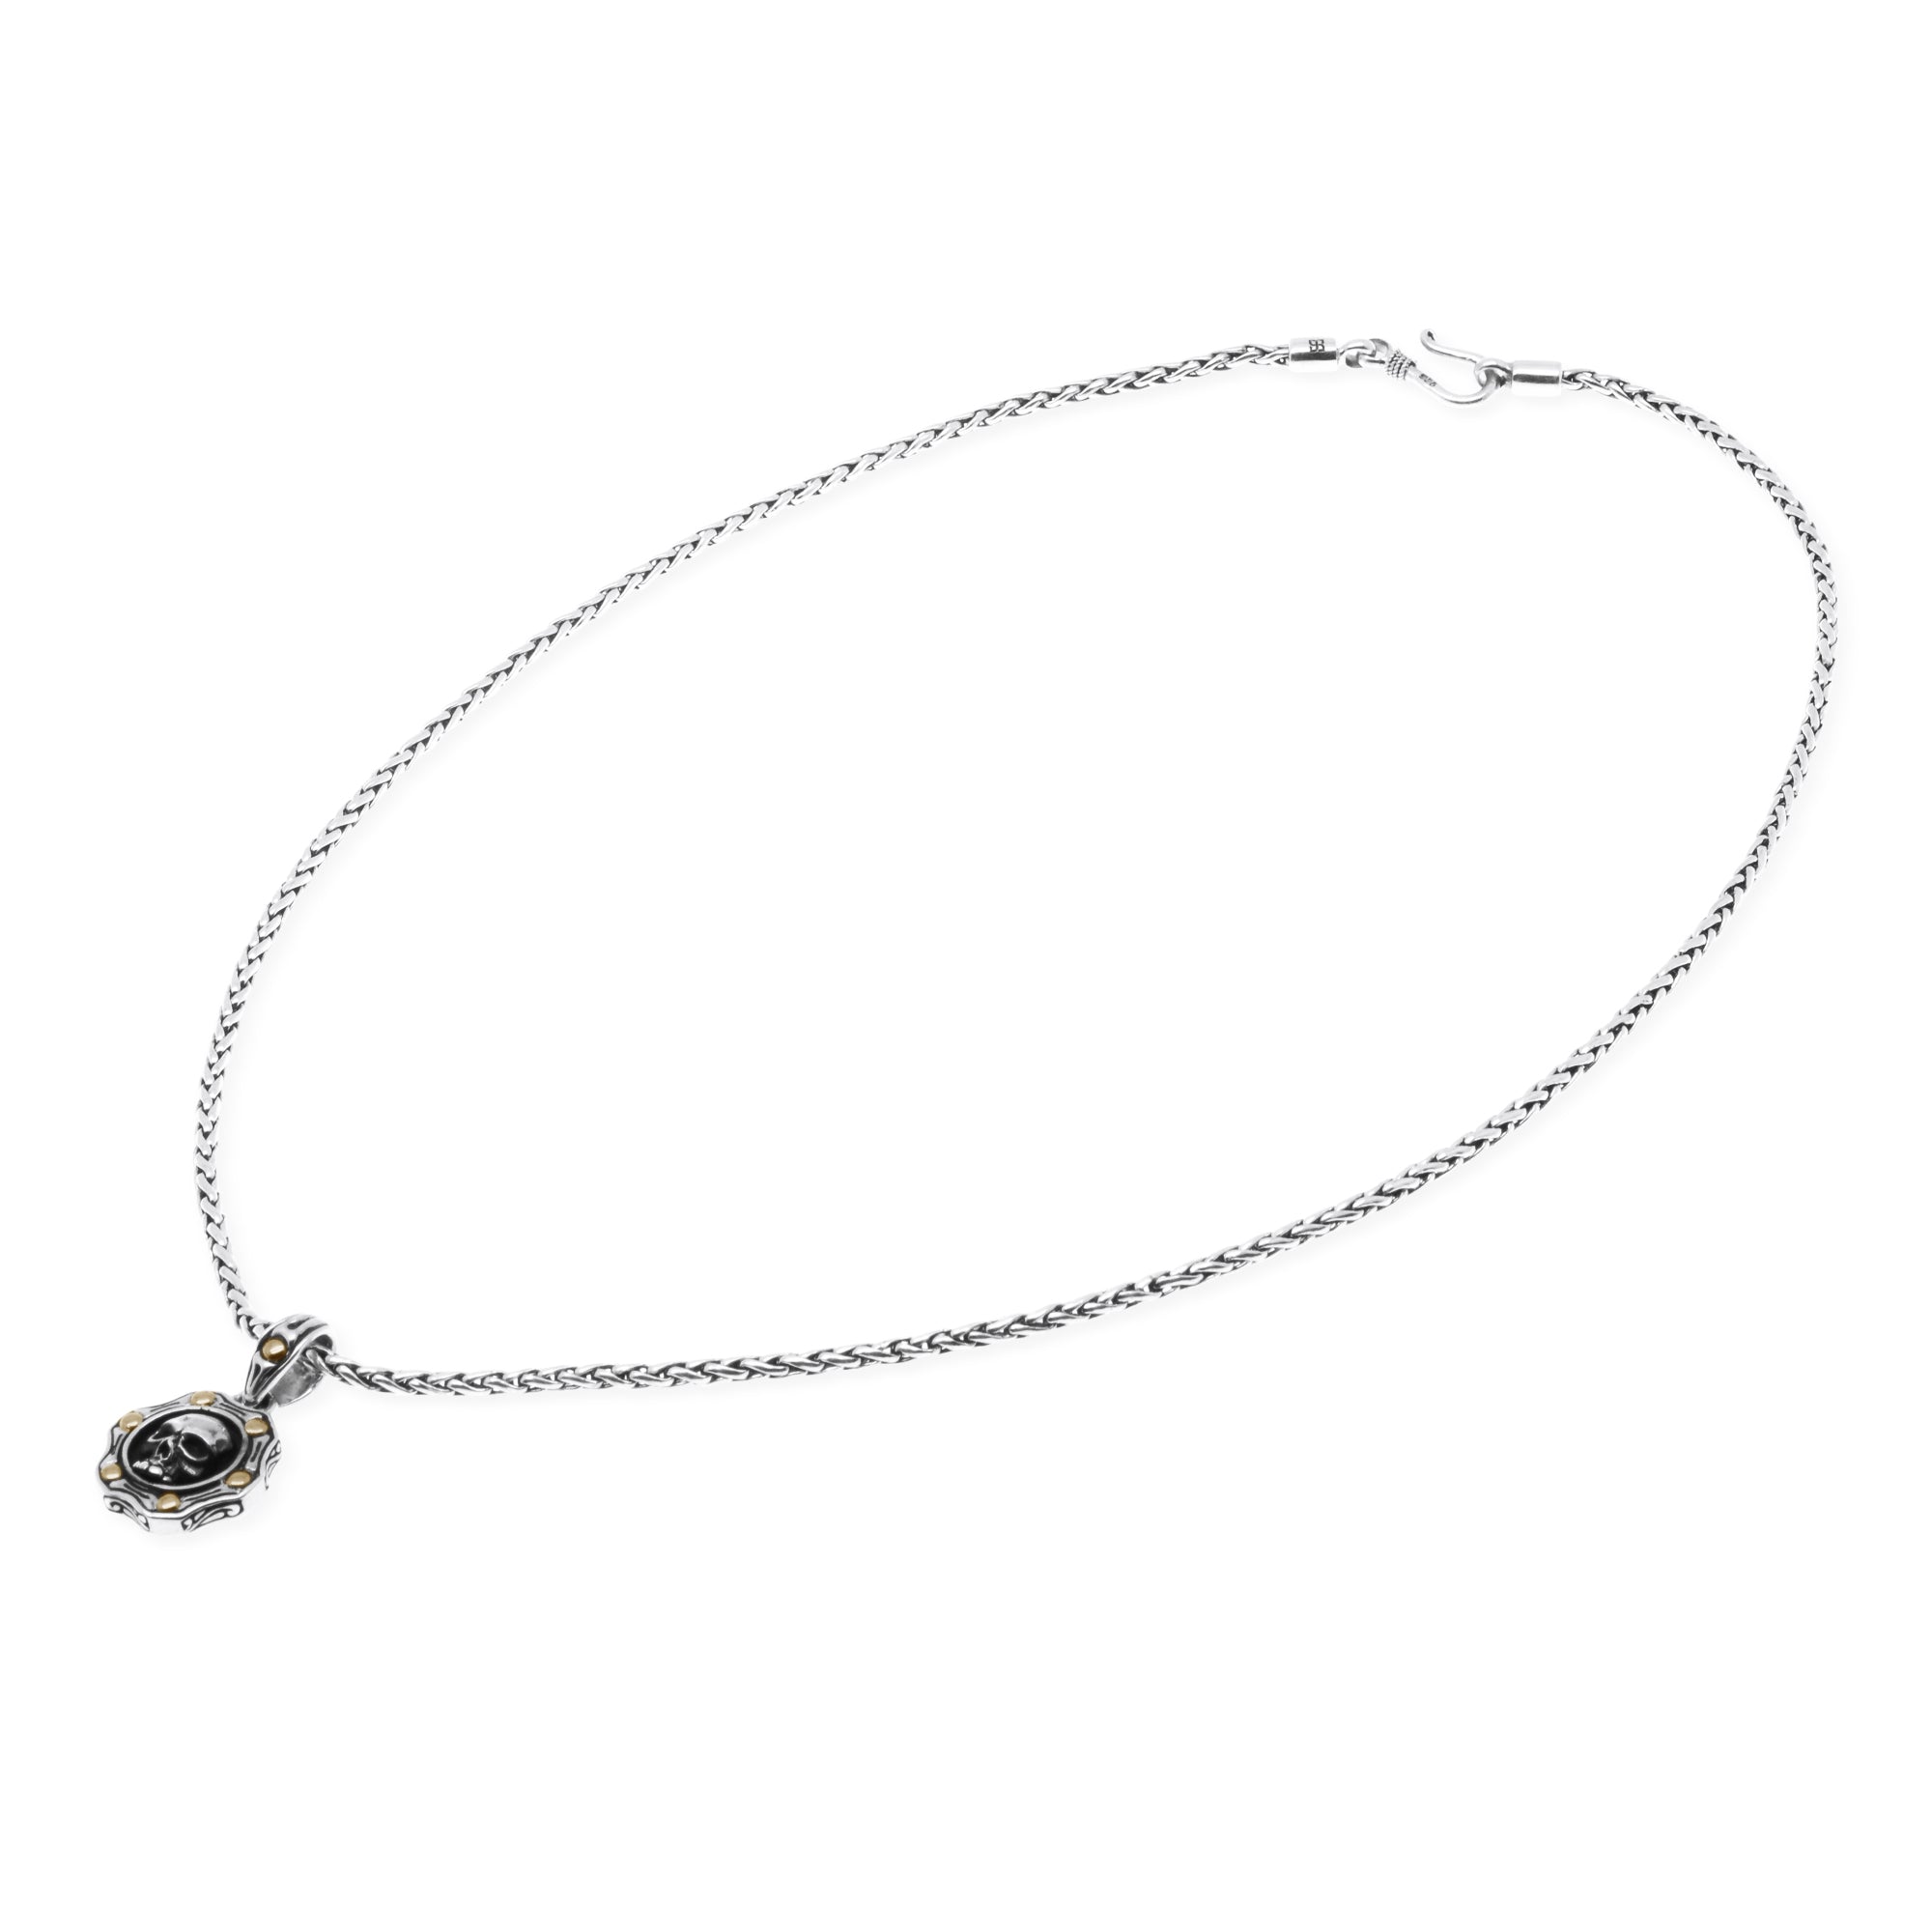 Chain Necklace Silver Trunyan